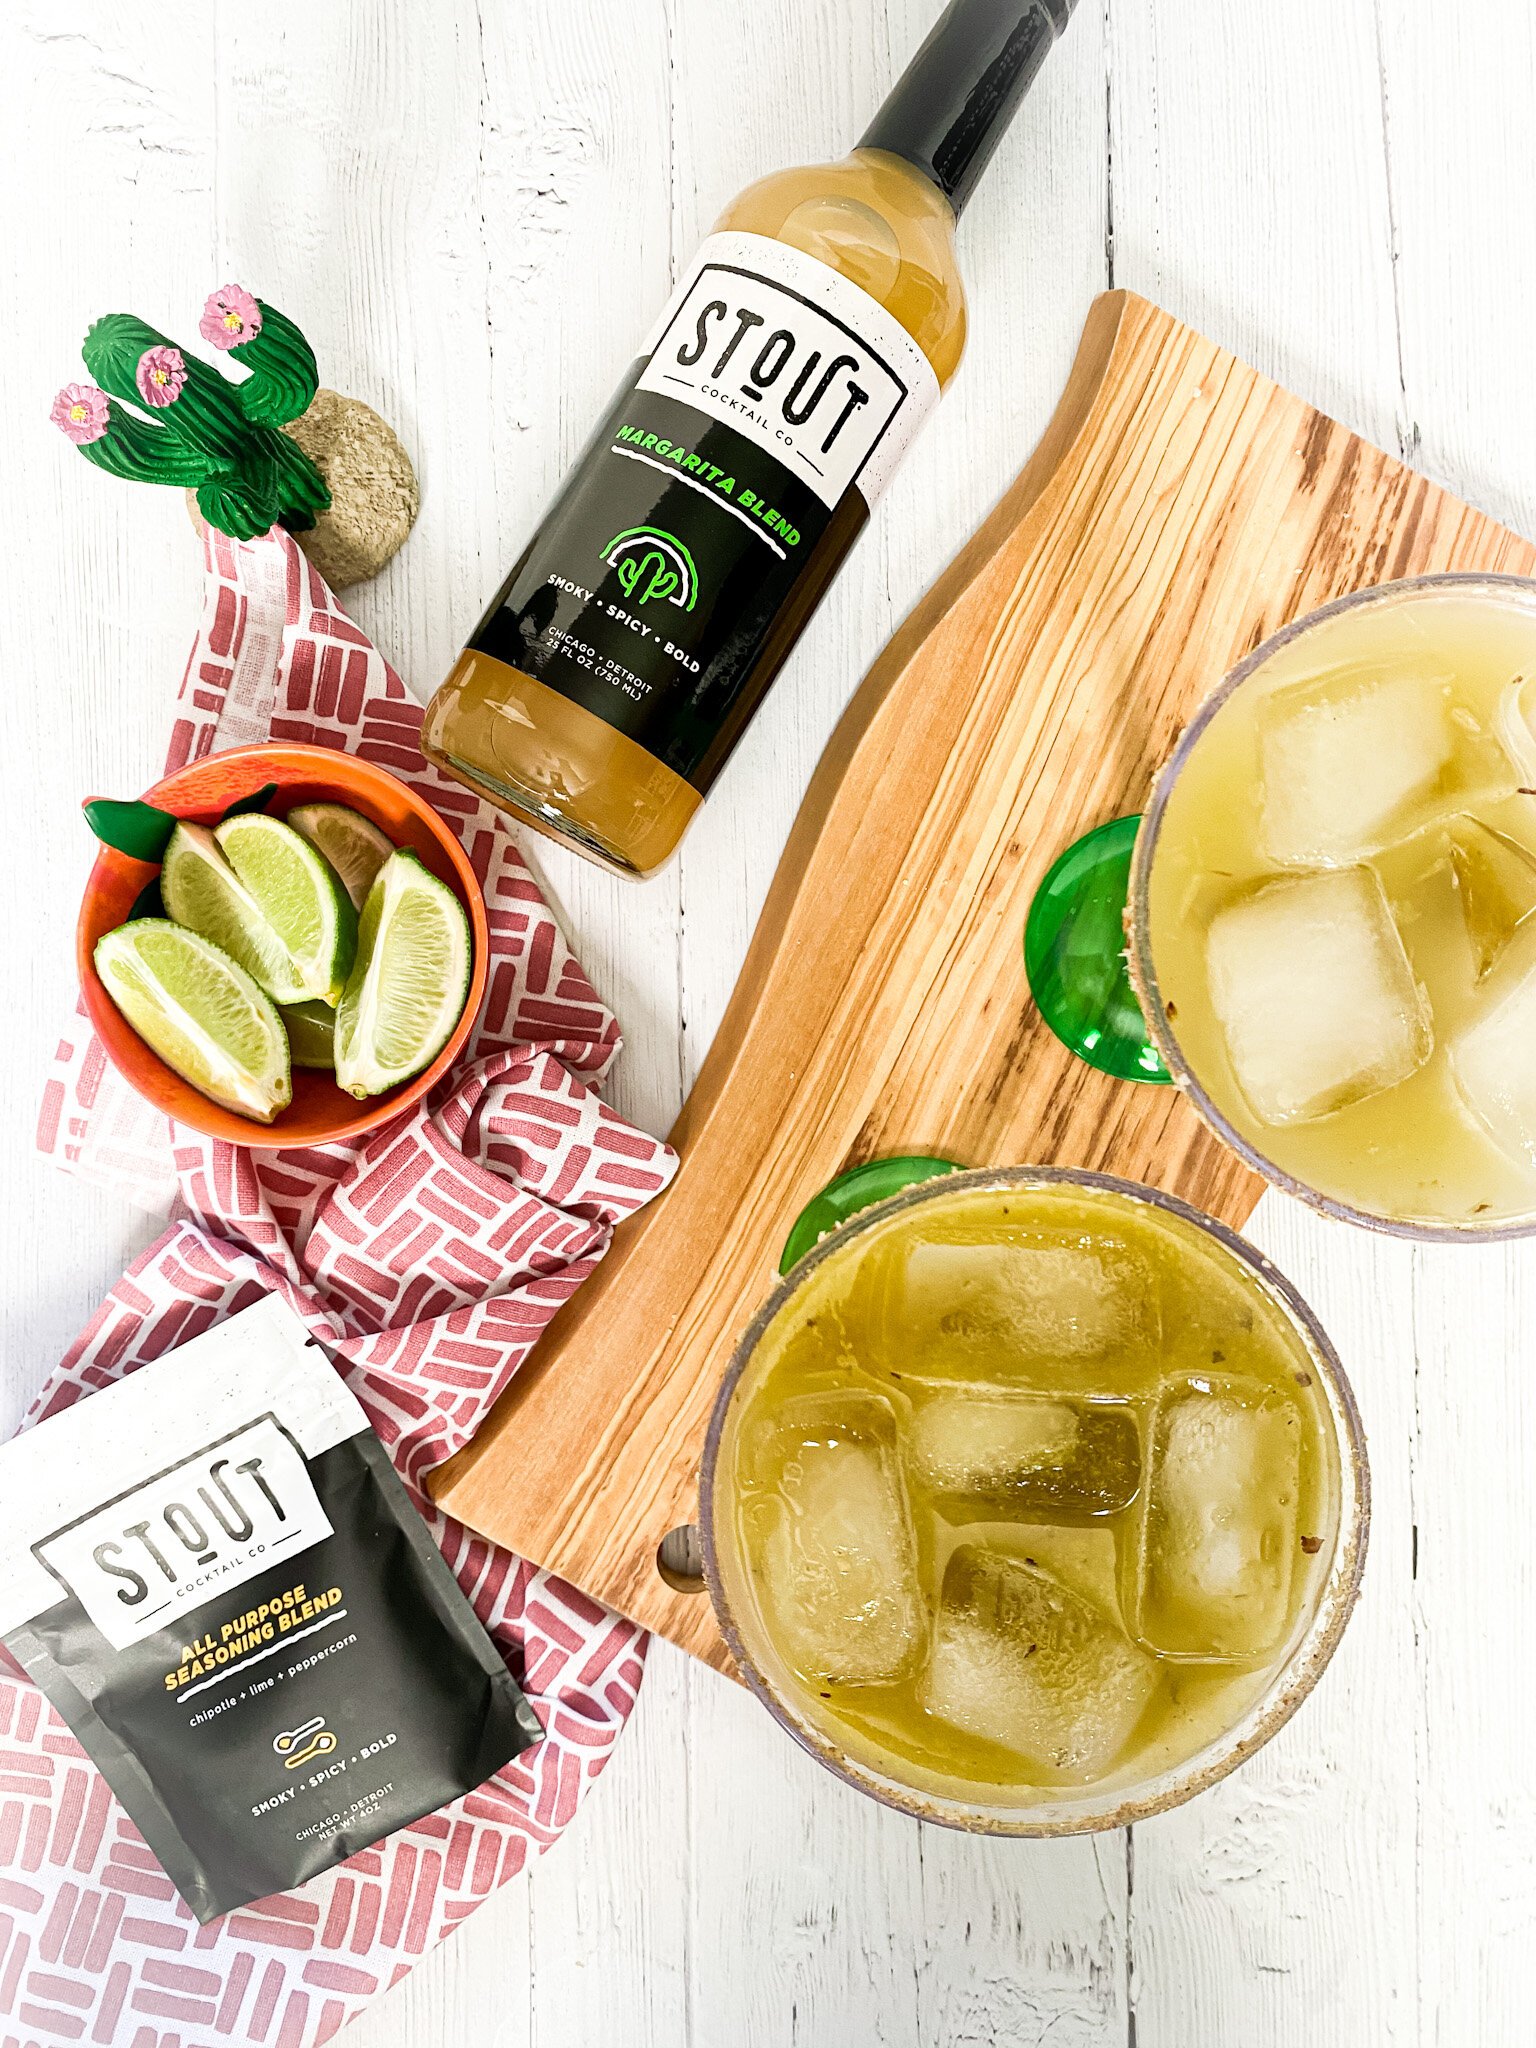 roasted+tomatillo+and.+jalapeno+margarita+recipe+stout+margarita+blend+bloody+mary+obsessed+recipes+6.jpg